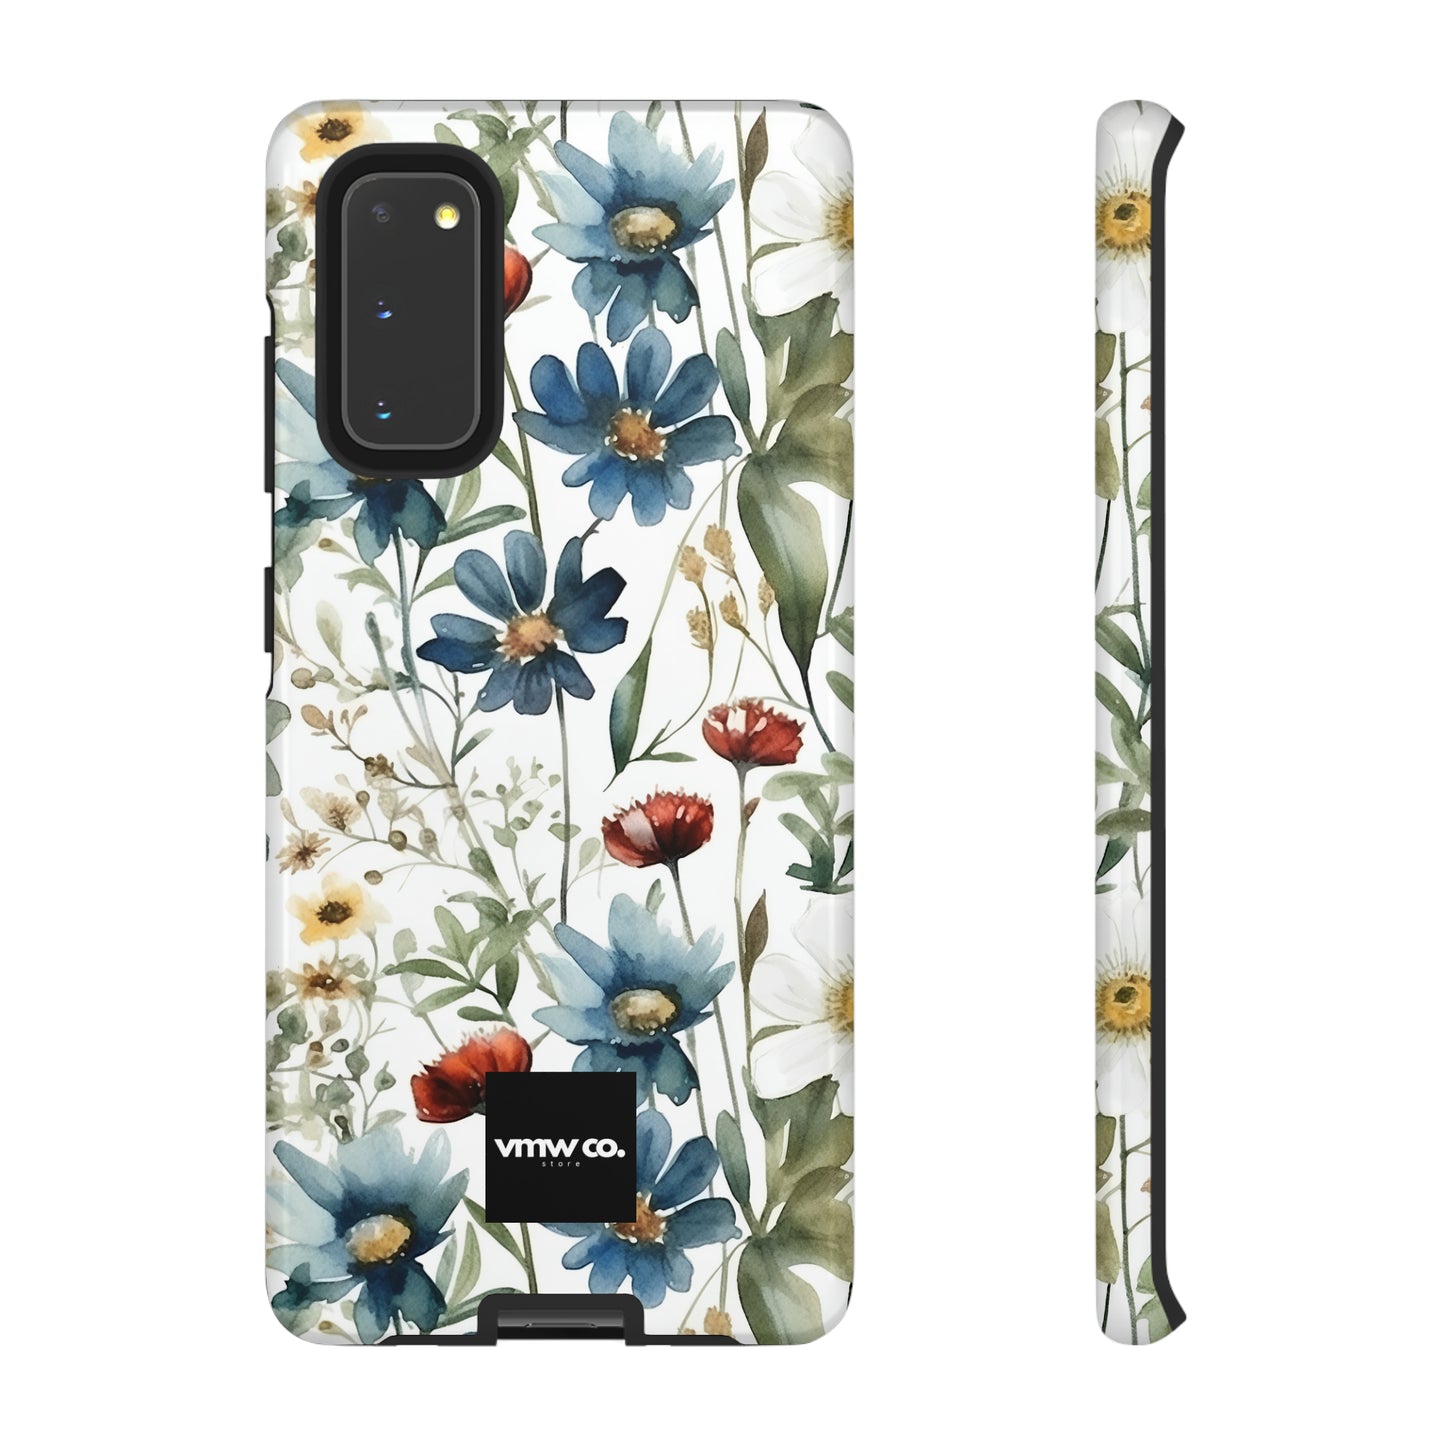 Cerulean Waltz Android Tough Cases